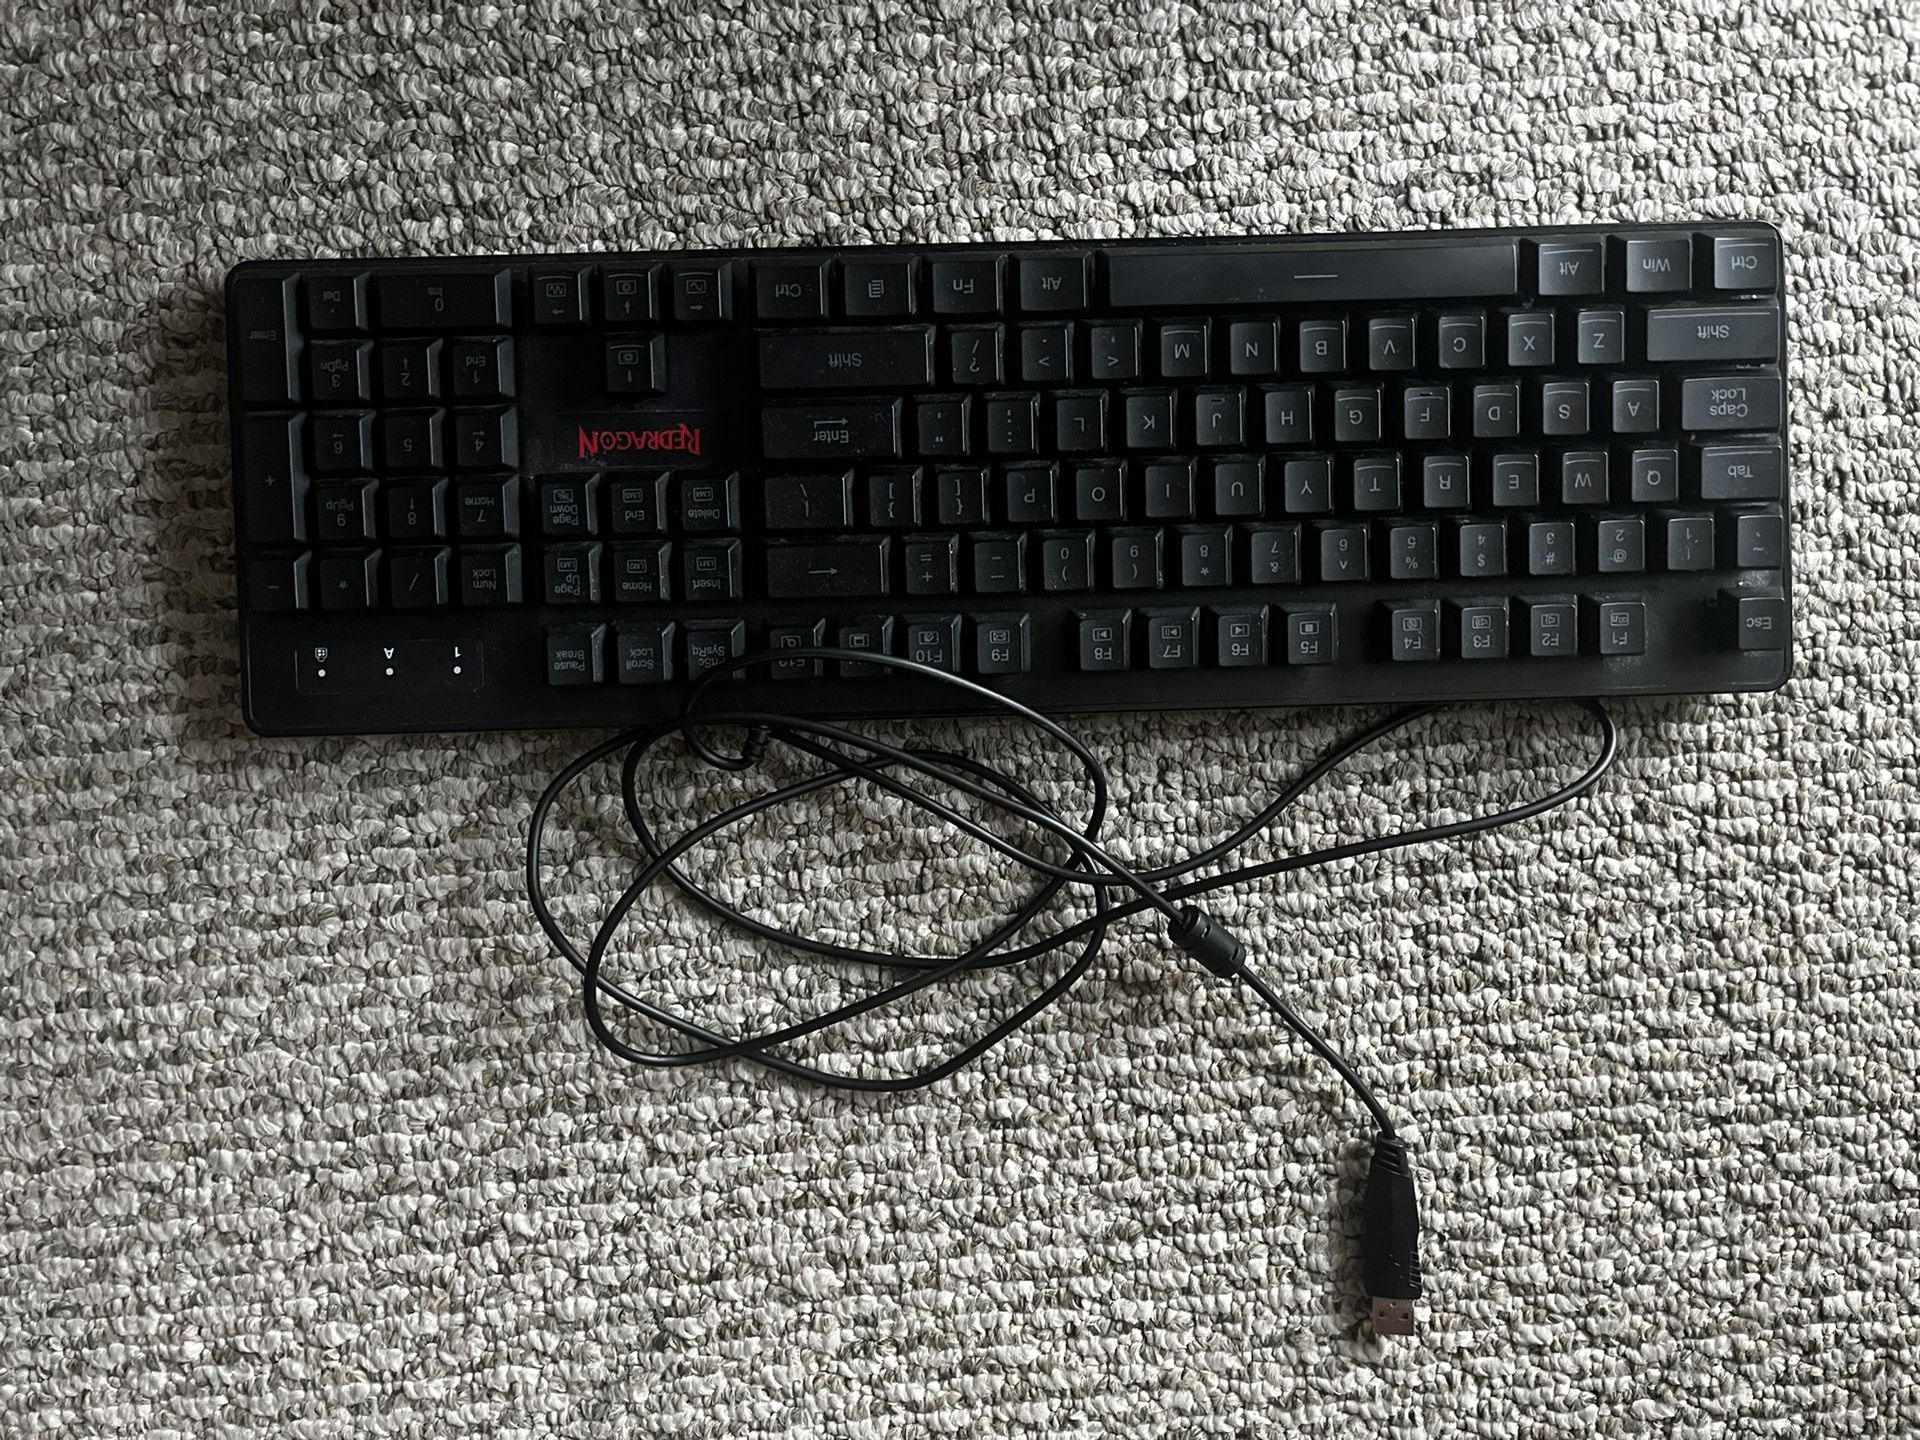 Red Dragon Keyboard Very Good Condition